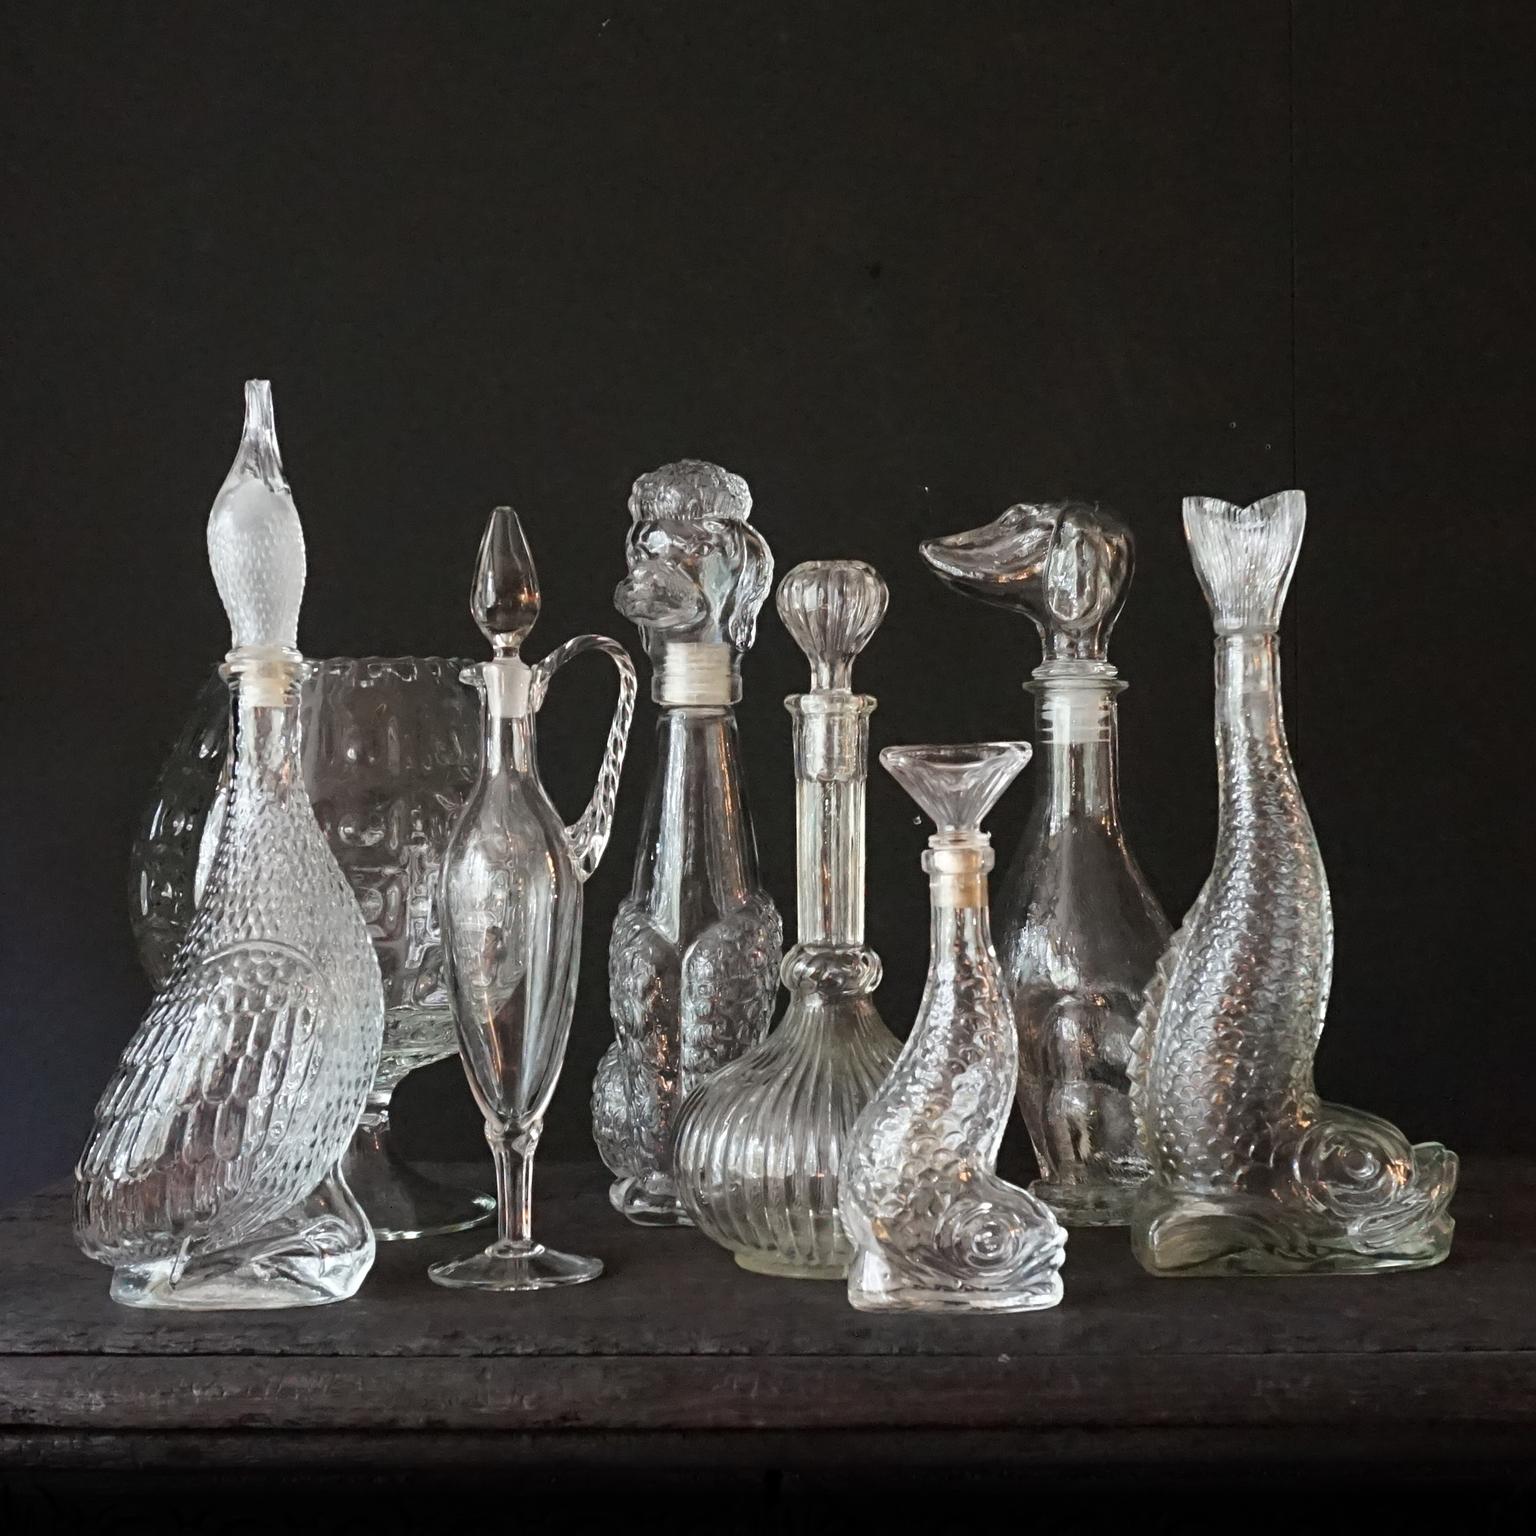 Very decorative rare clear glass set of eight different size Italian pressed glass bottles.
This set is almost completely animal themed, a duck, a poodle, a dachshund and two fishes. But also a pressed Brutalist large cognac glass a petite blown